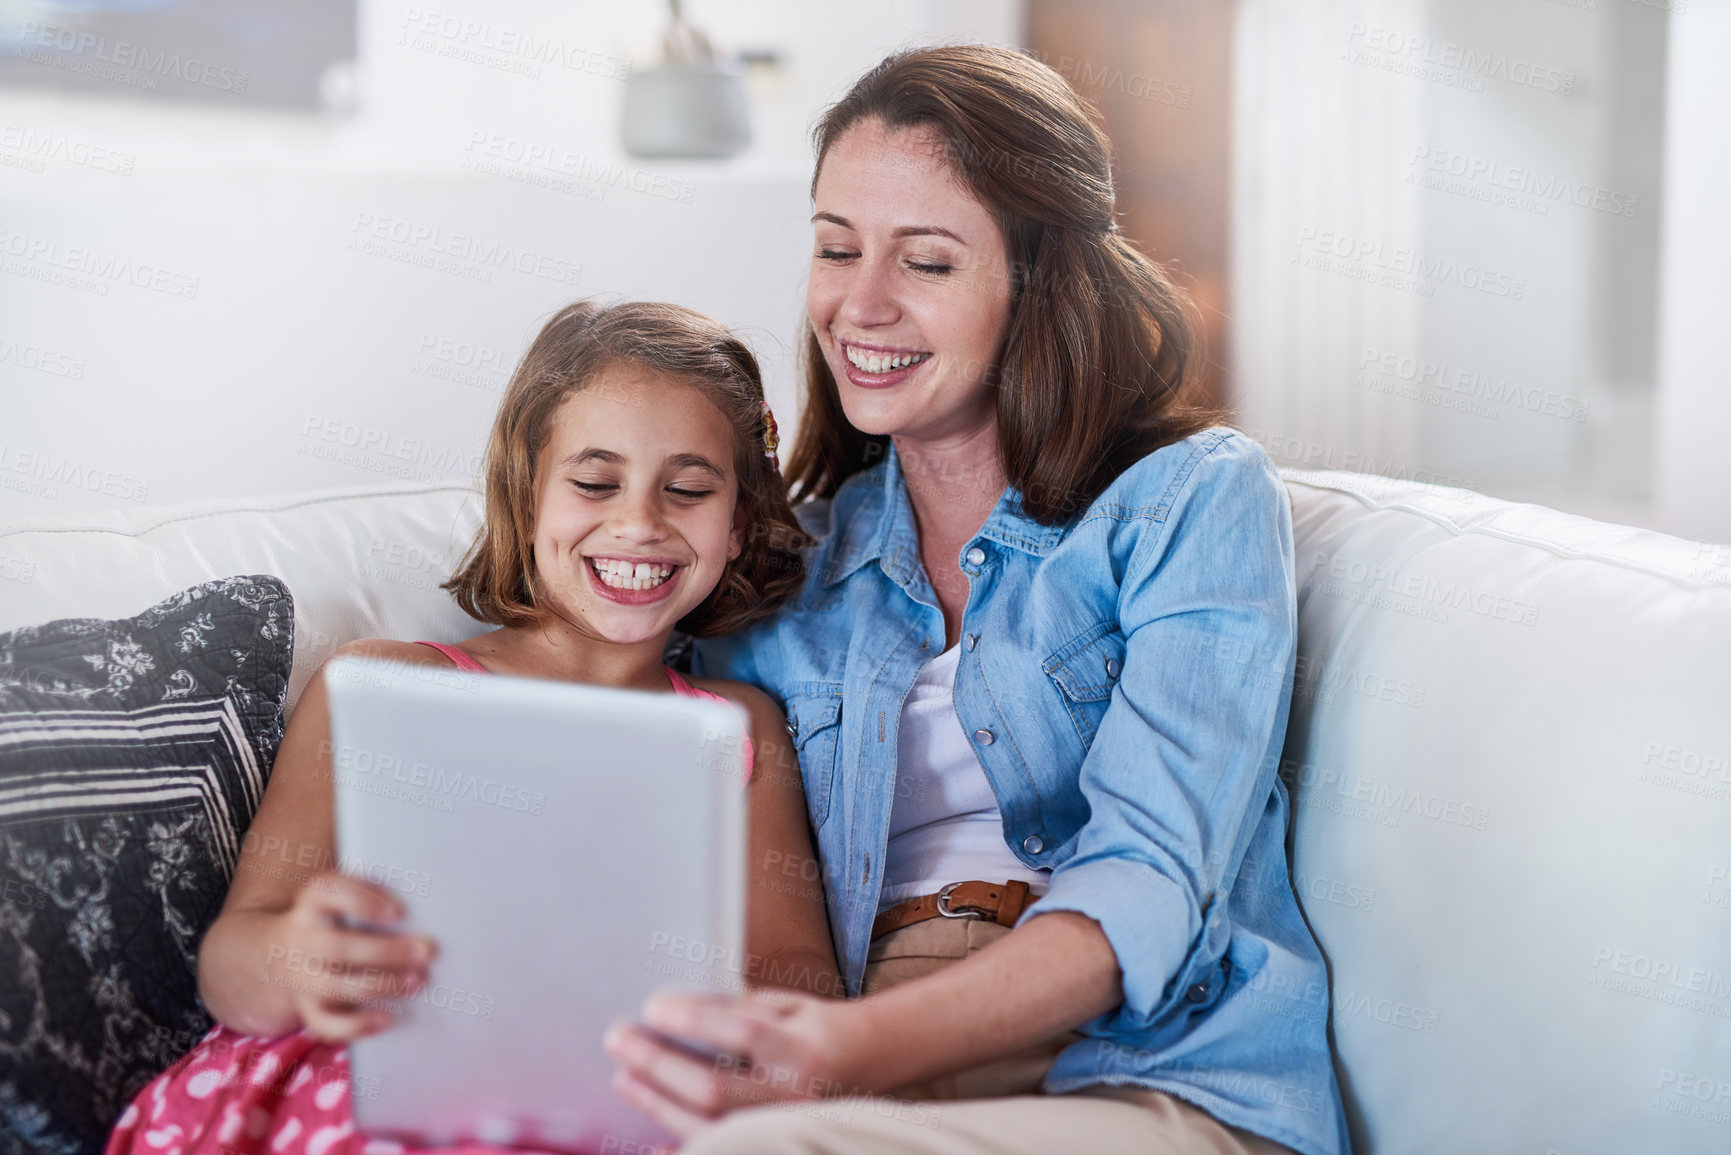 Buy stock photo Cropped shot of a mother and her daughter using wireless technology at home